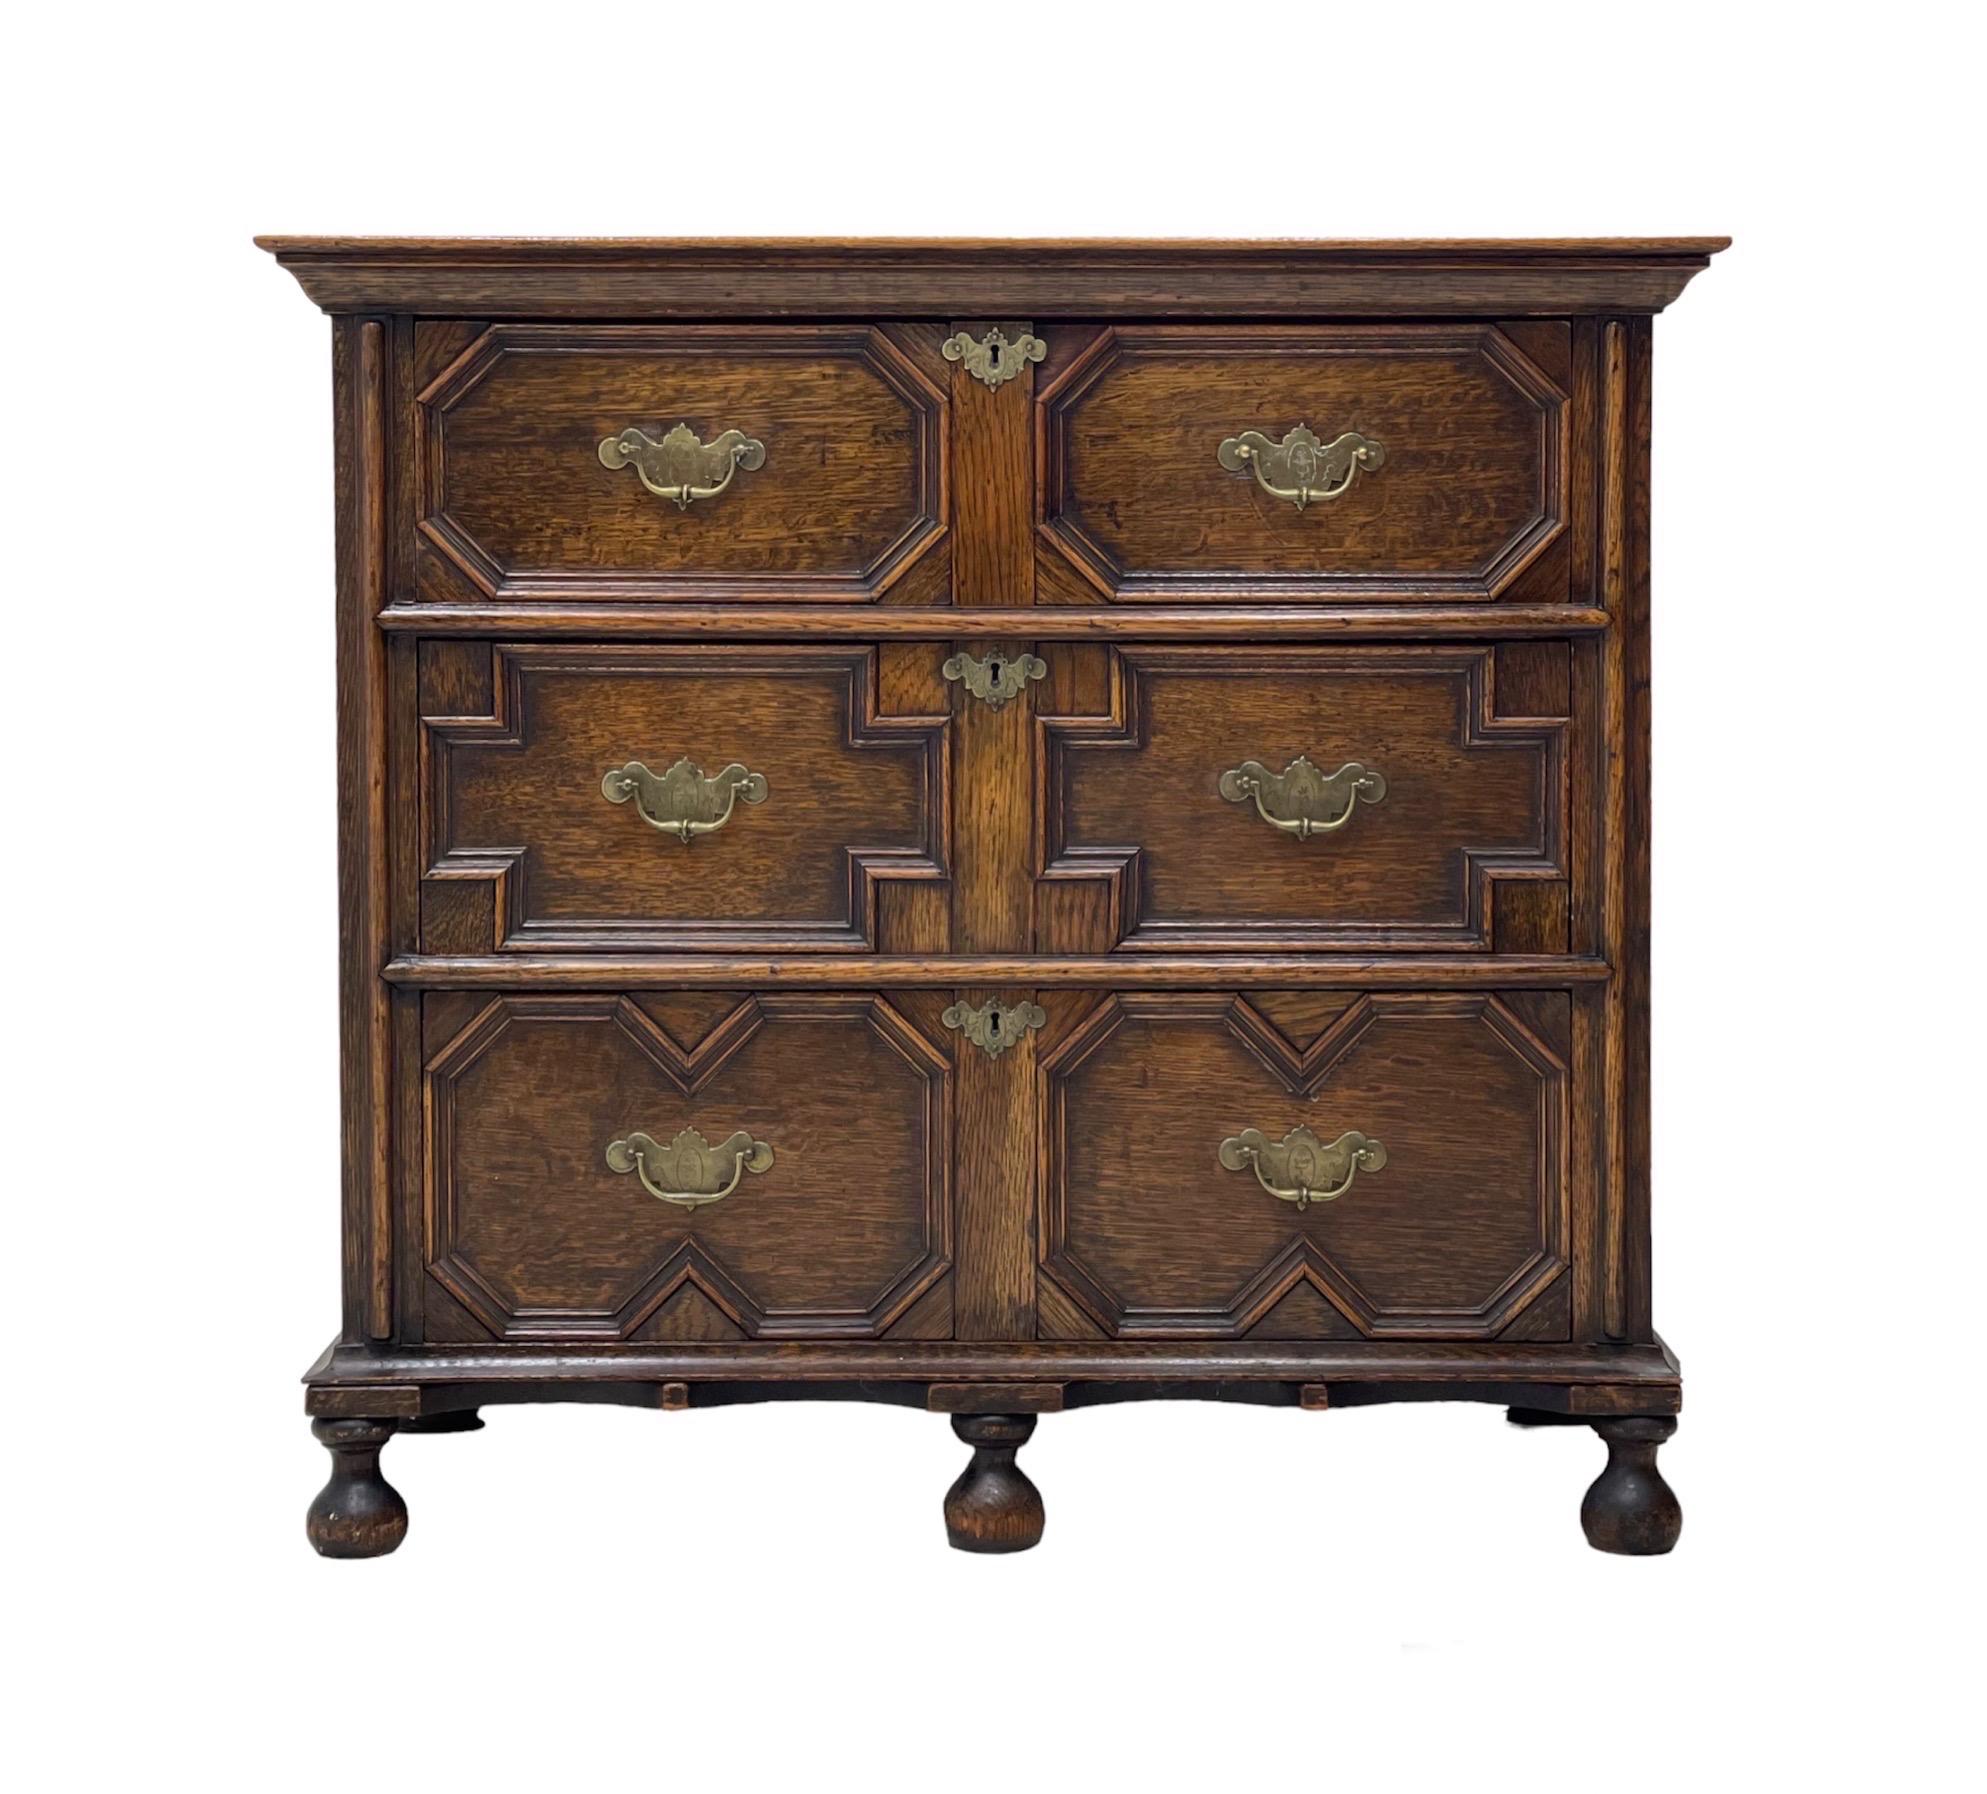 Antique circa 1590s English Jacobean Dresser Dovetail Drawers. This Antique Dresser came from Home of Certified Member ISA Appraiser in Seattle

Dimensions. 39 1/2 W ; 21 D ; 36 H